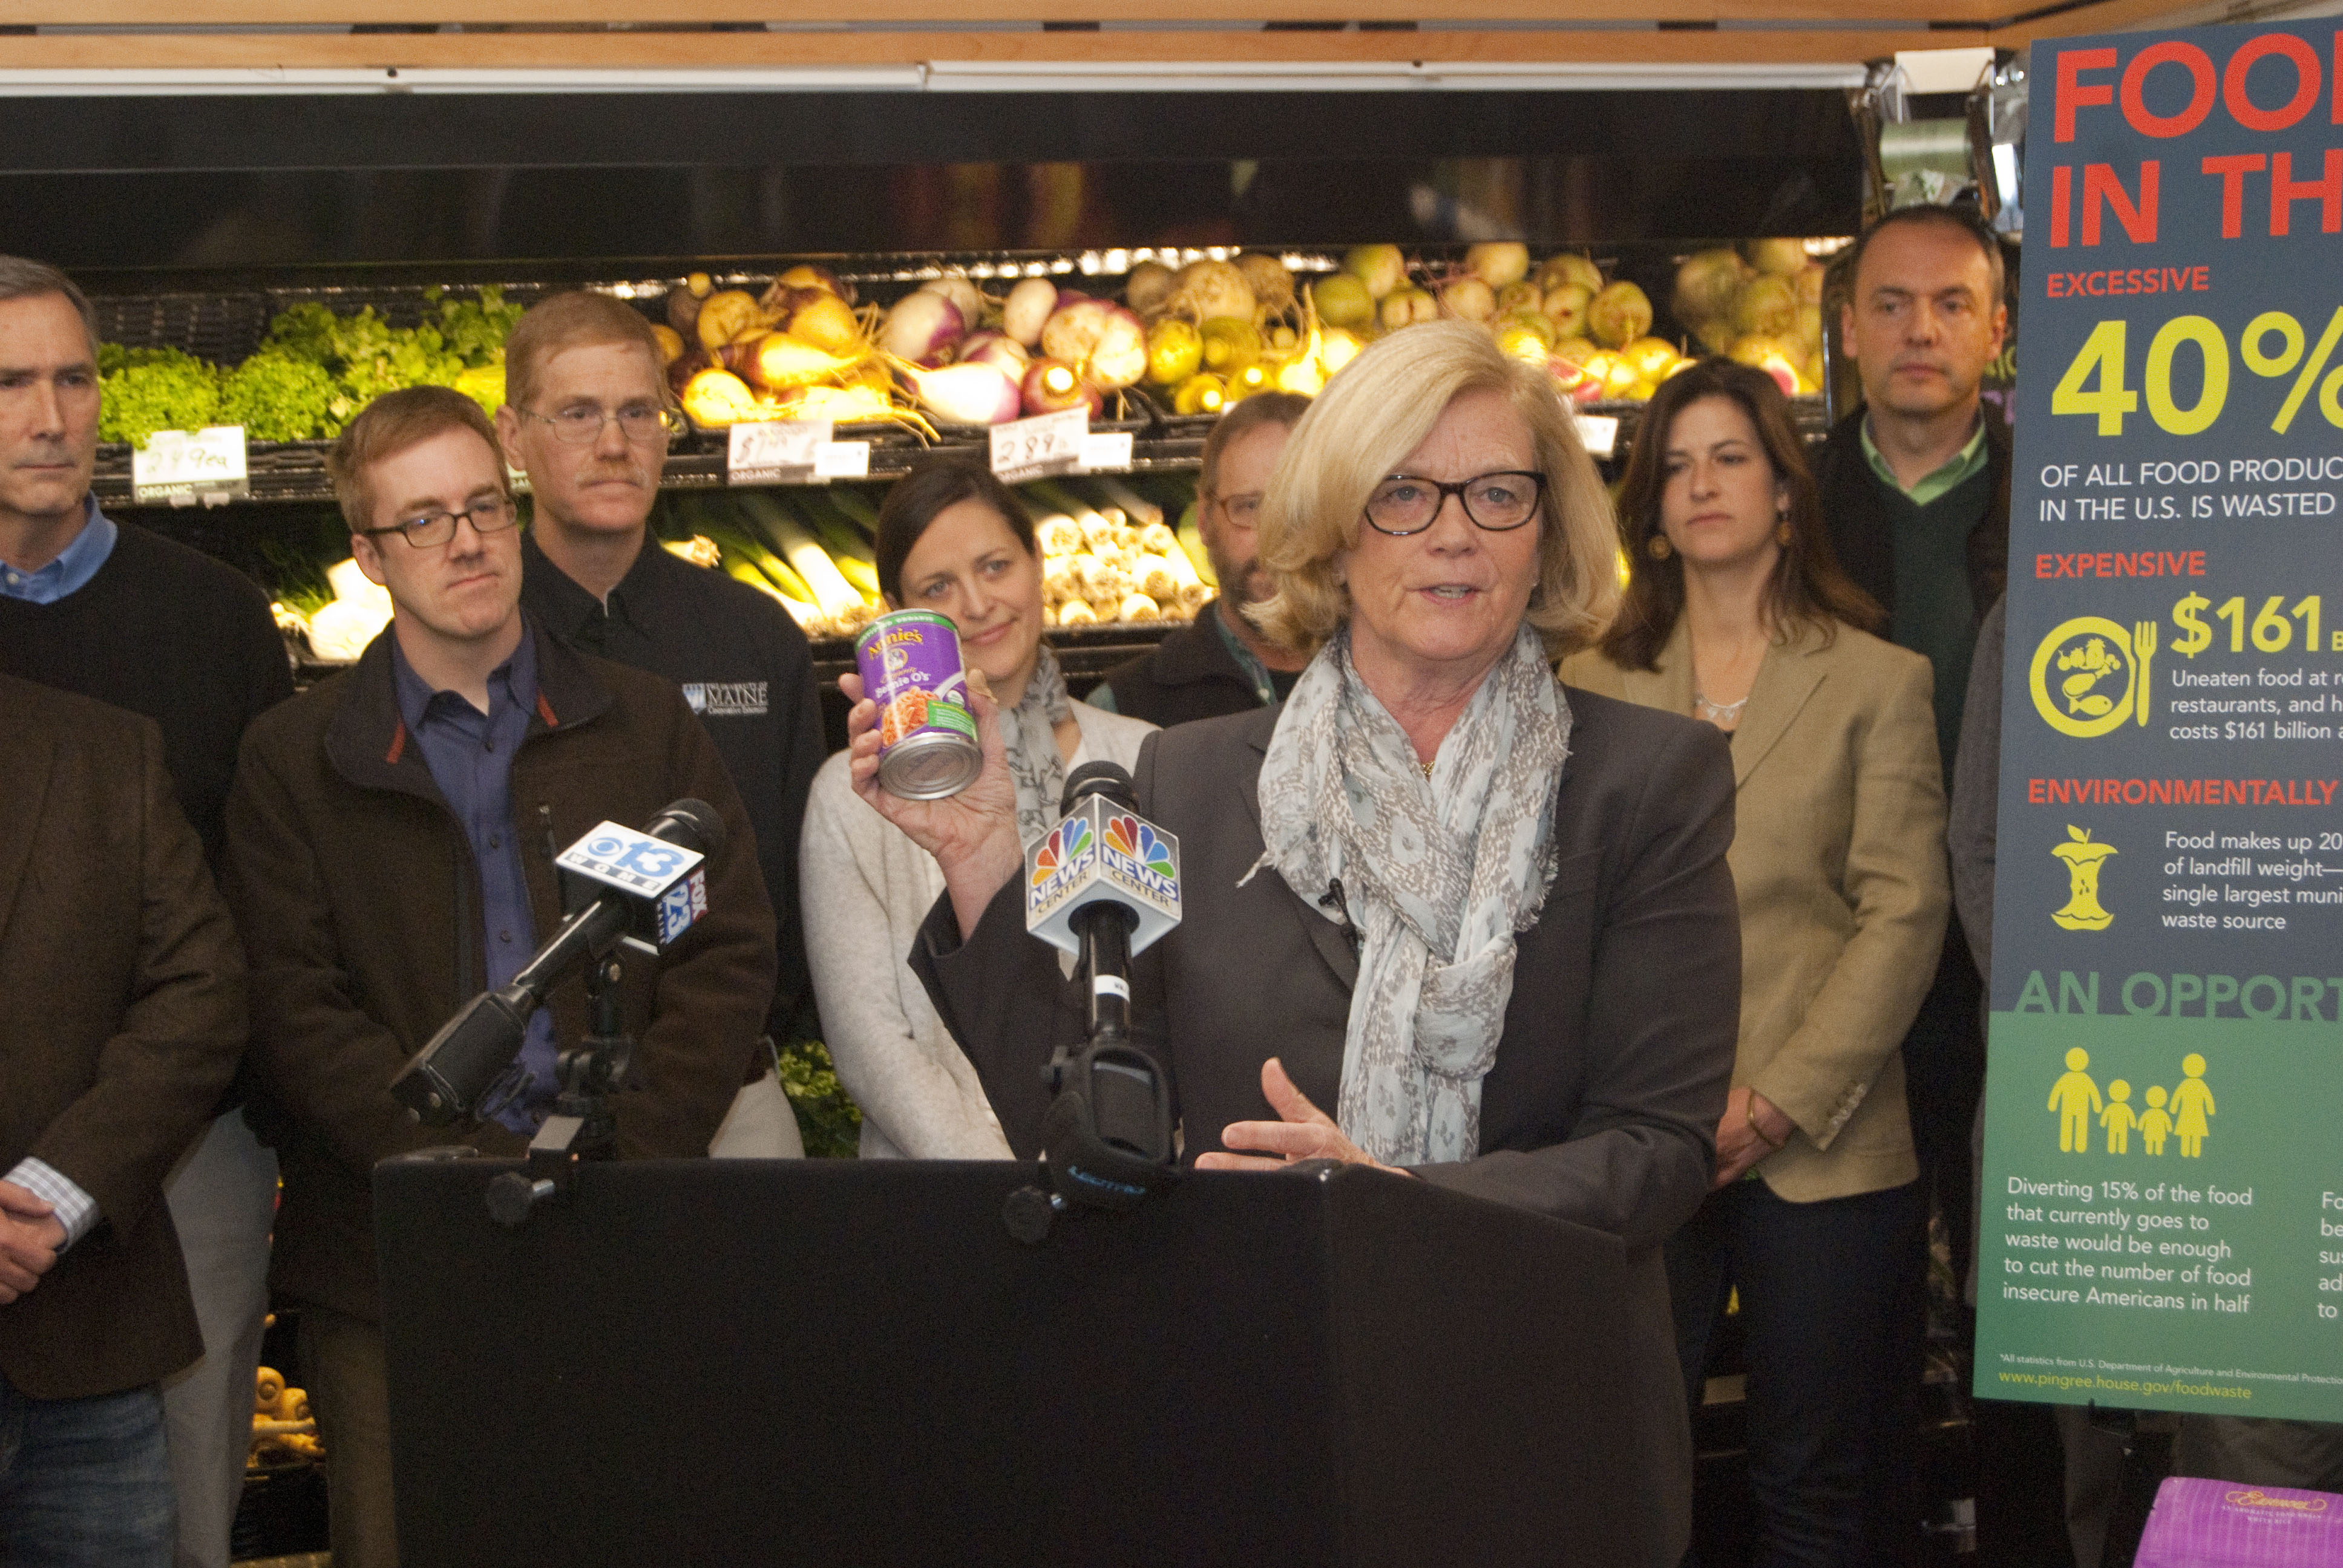 Chellie Pingree introducing legislation at the 2015 Food Recover Act Press Conference